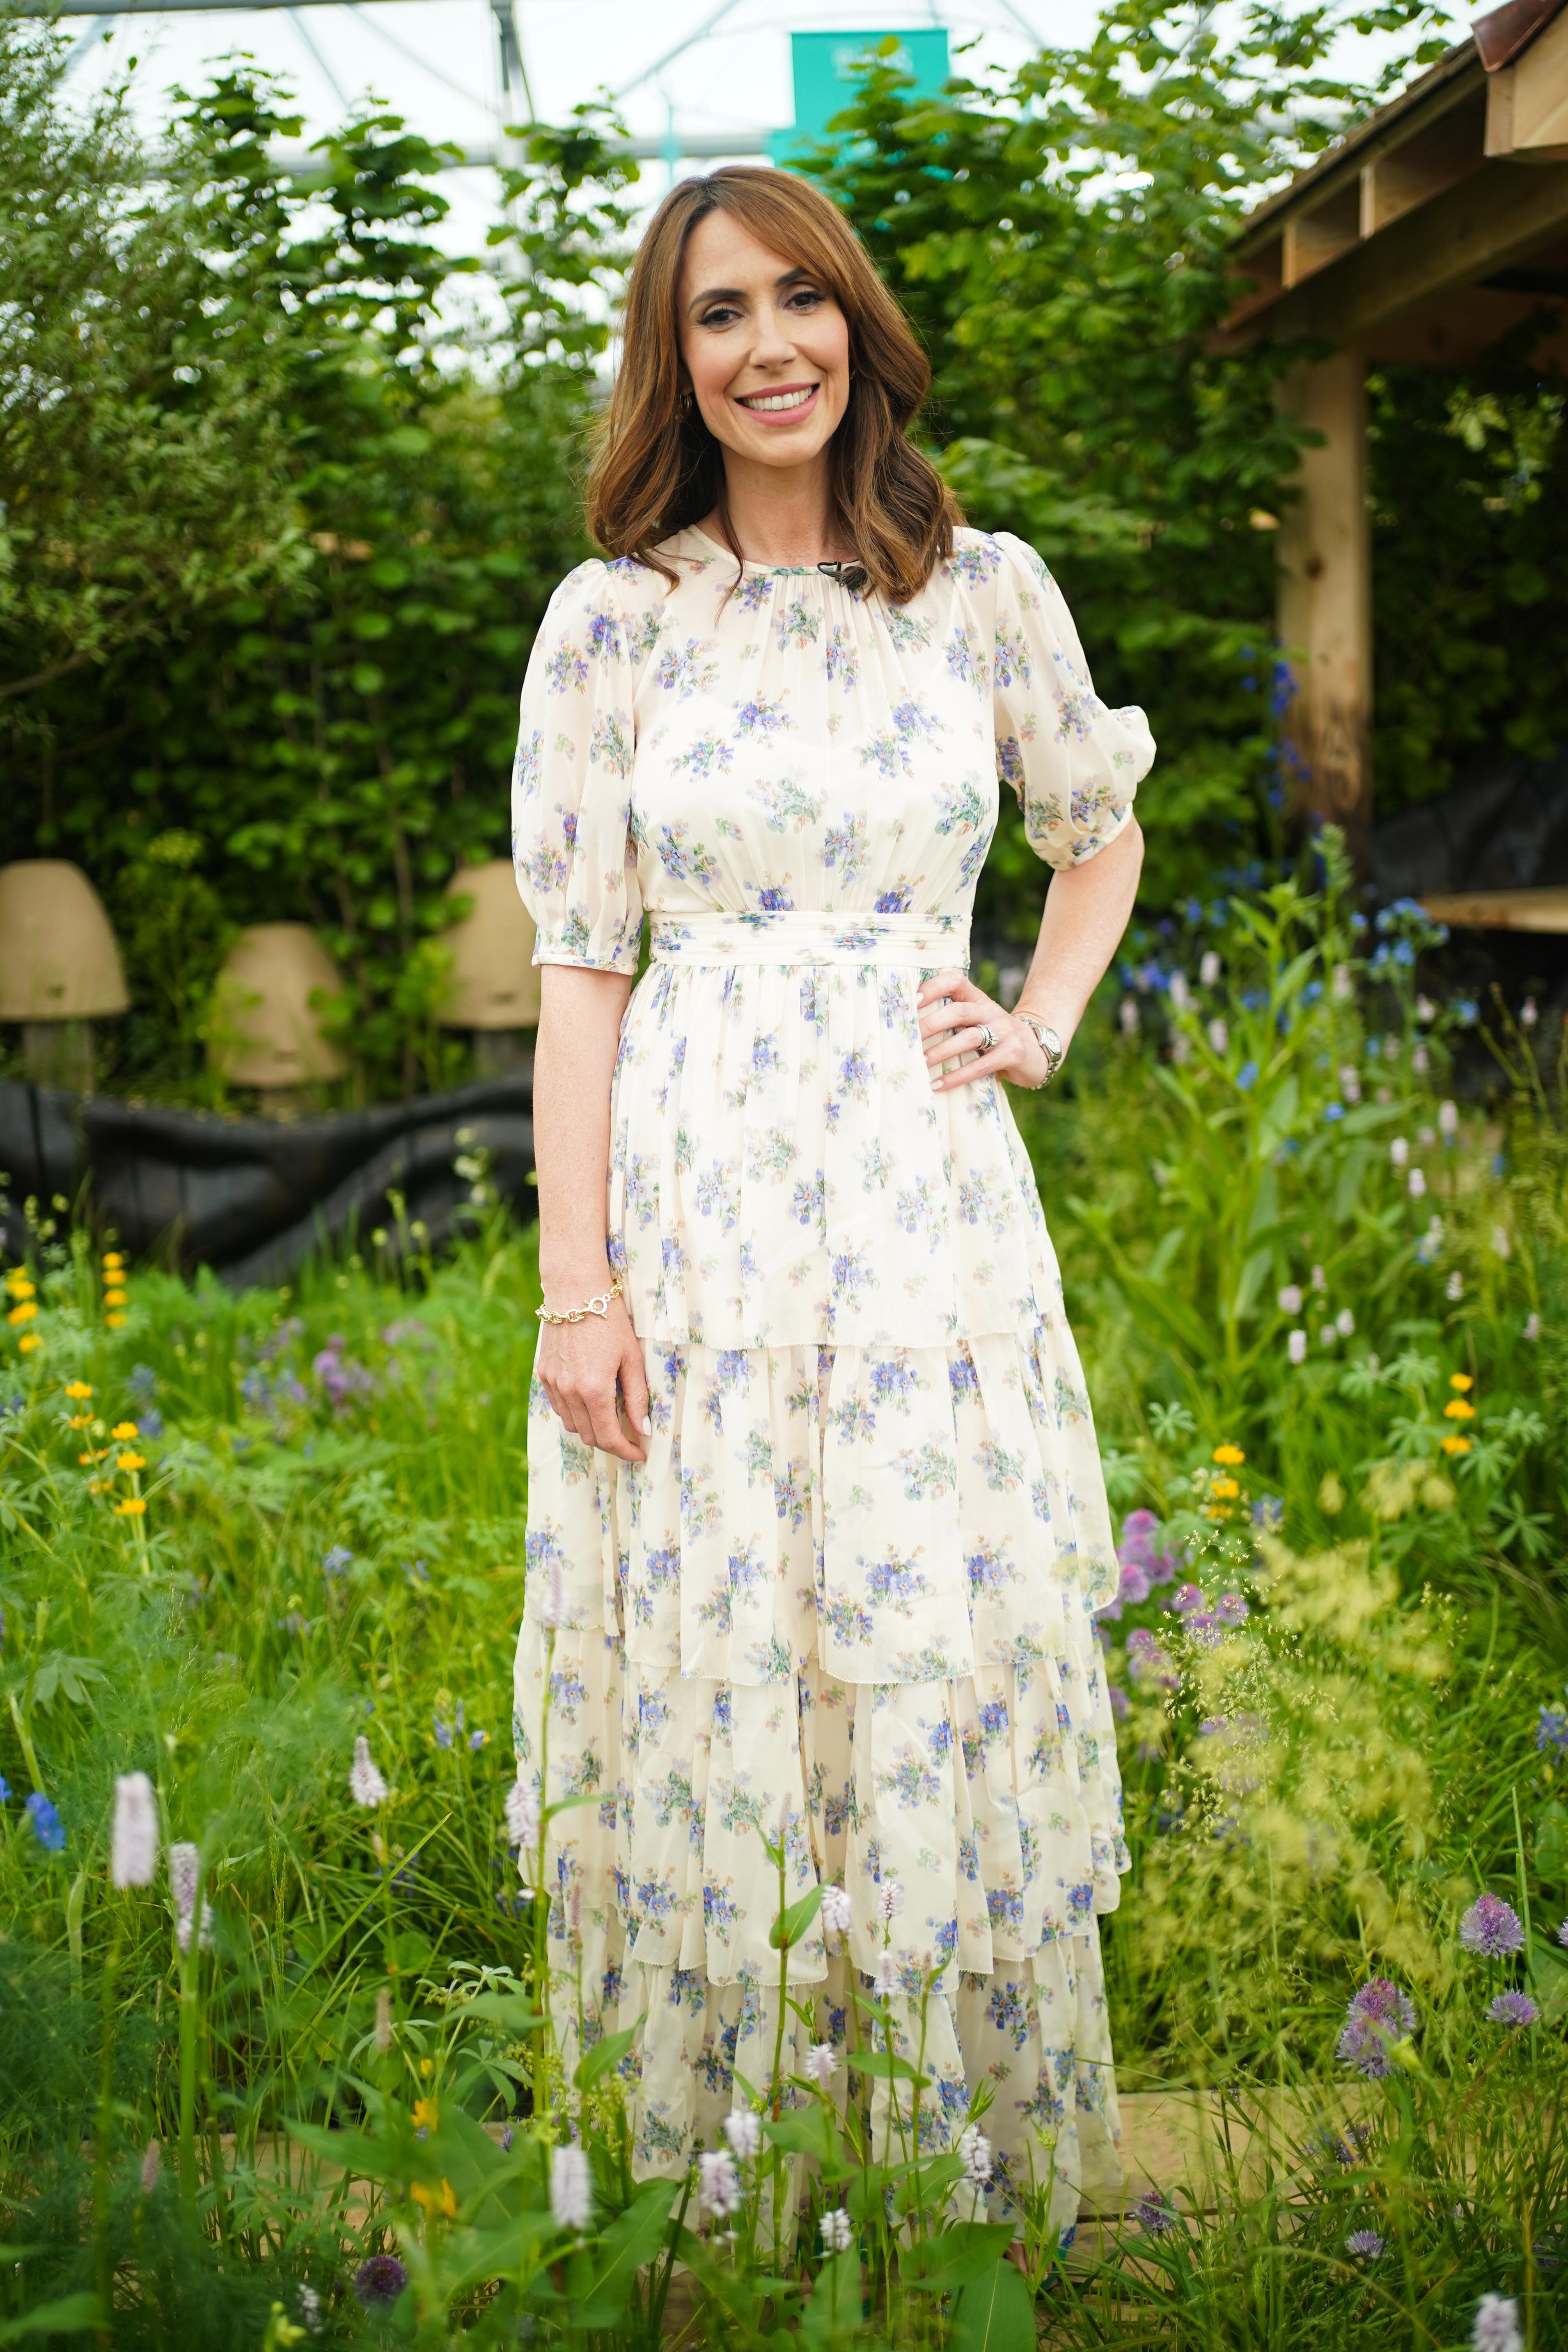 TV presenter Alex Jones wore a tiered L K Bennett floral dress to the RHS Chelsea Flower Show in May (Alamy/PA)